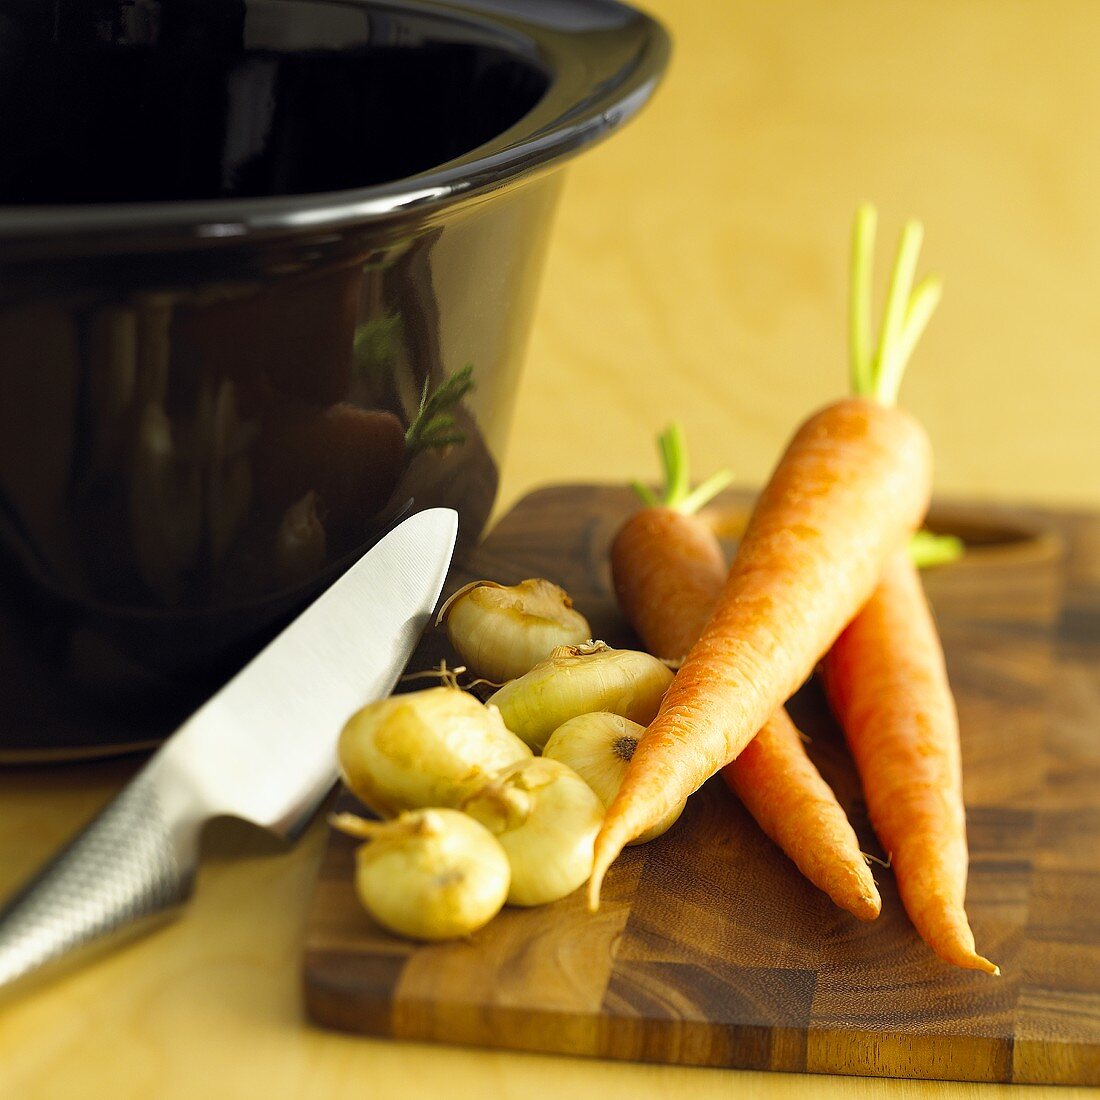 Onions and carrots with knife on a wooden board